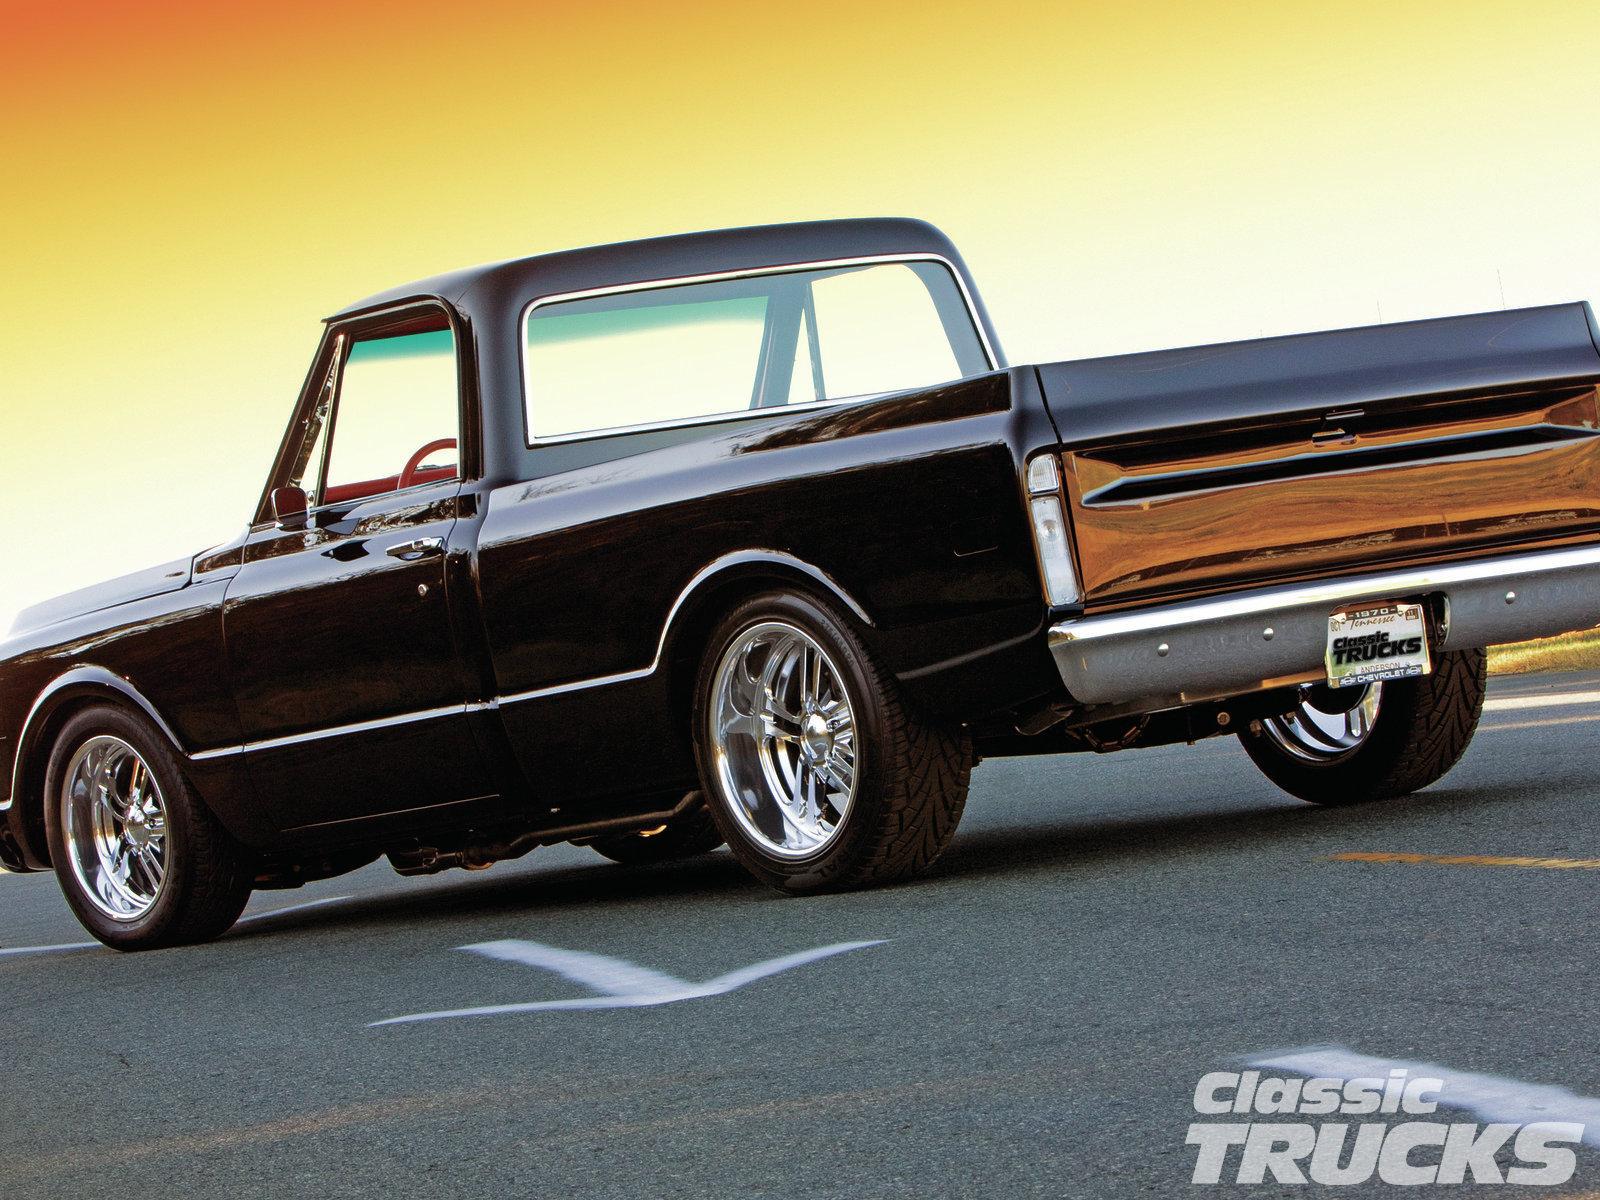 List of Synonyms and Antonyms of the Word: 70 Chevy Pickup